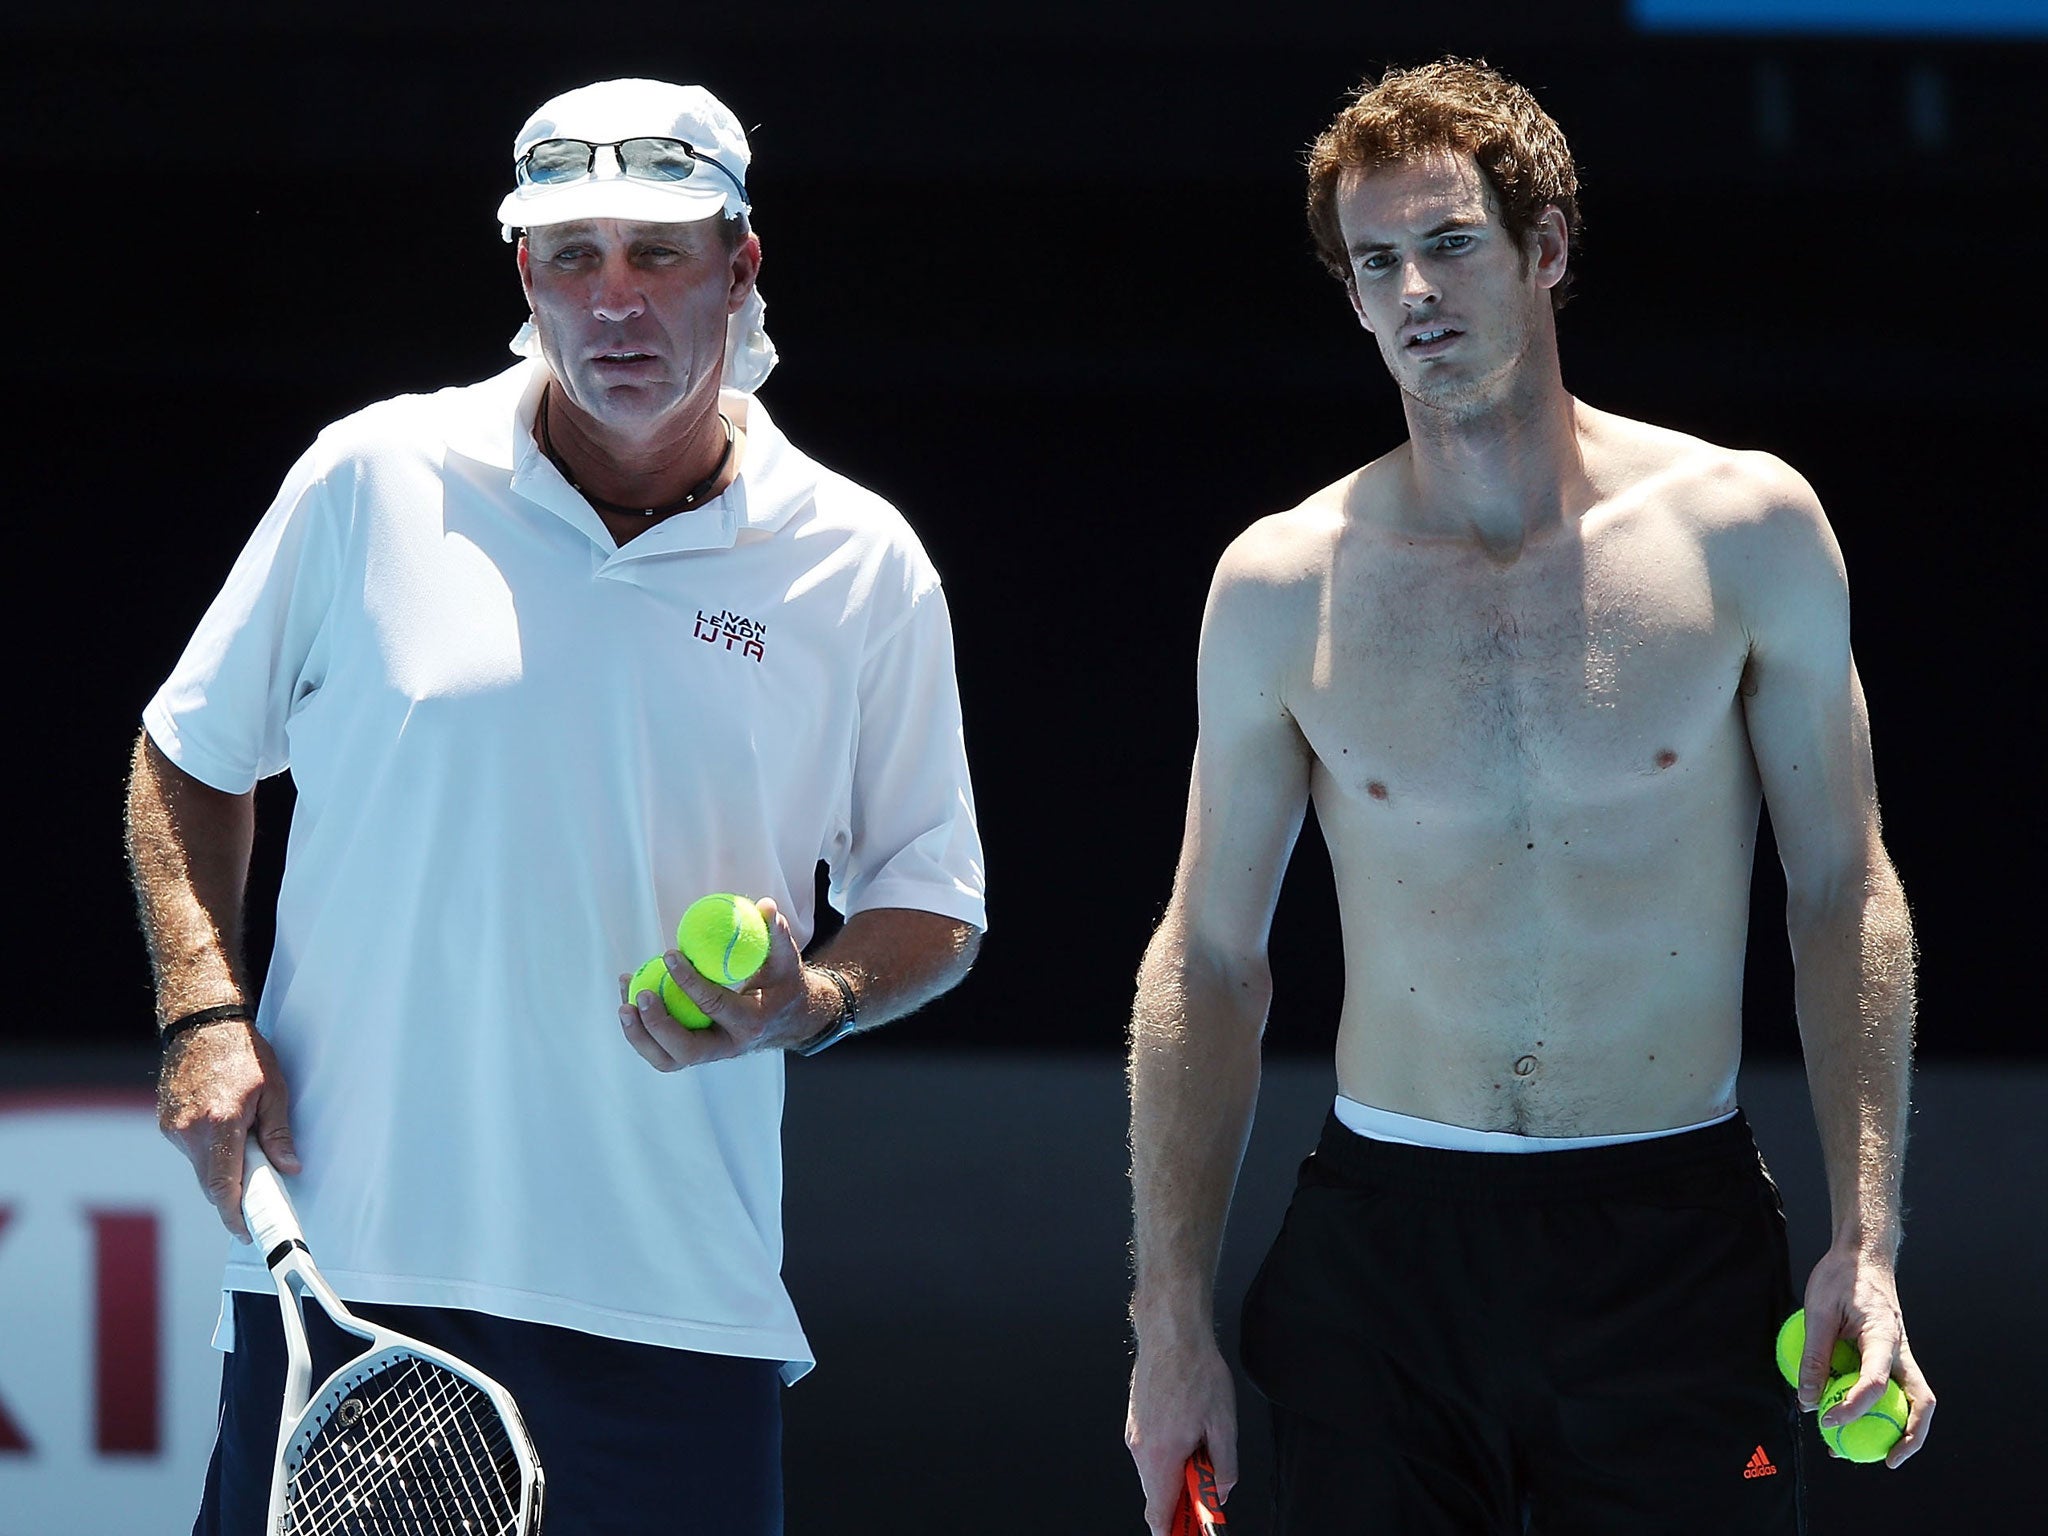 Andy Murray has put in plenty of work on court with coach Ivan Lendl in preparation for the Australian Open